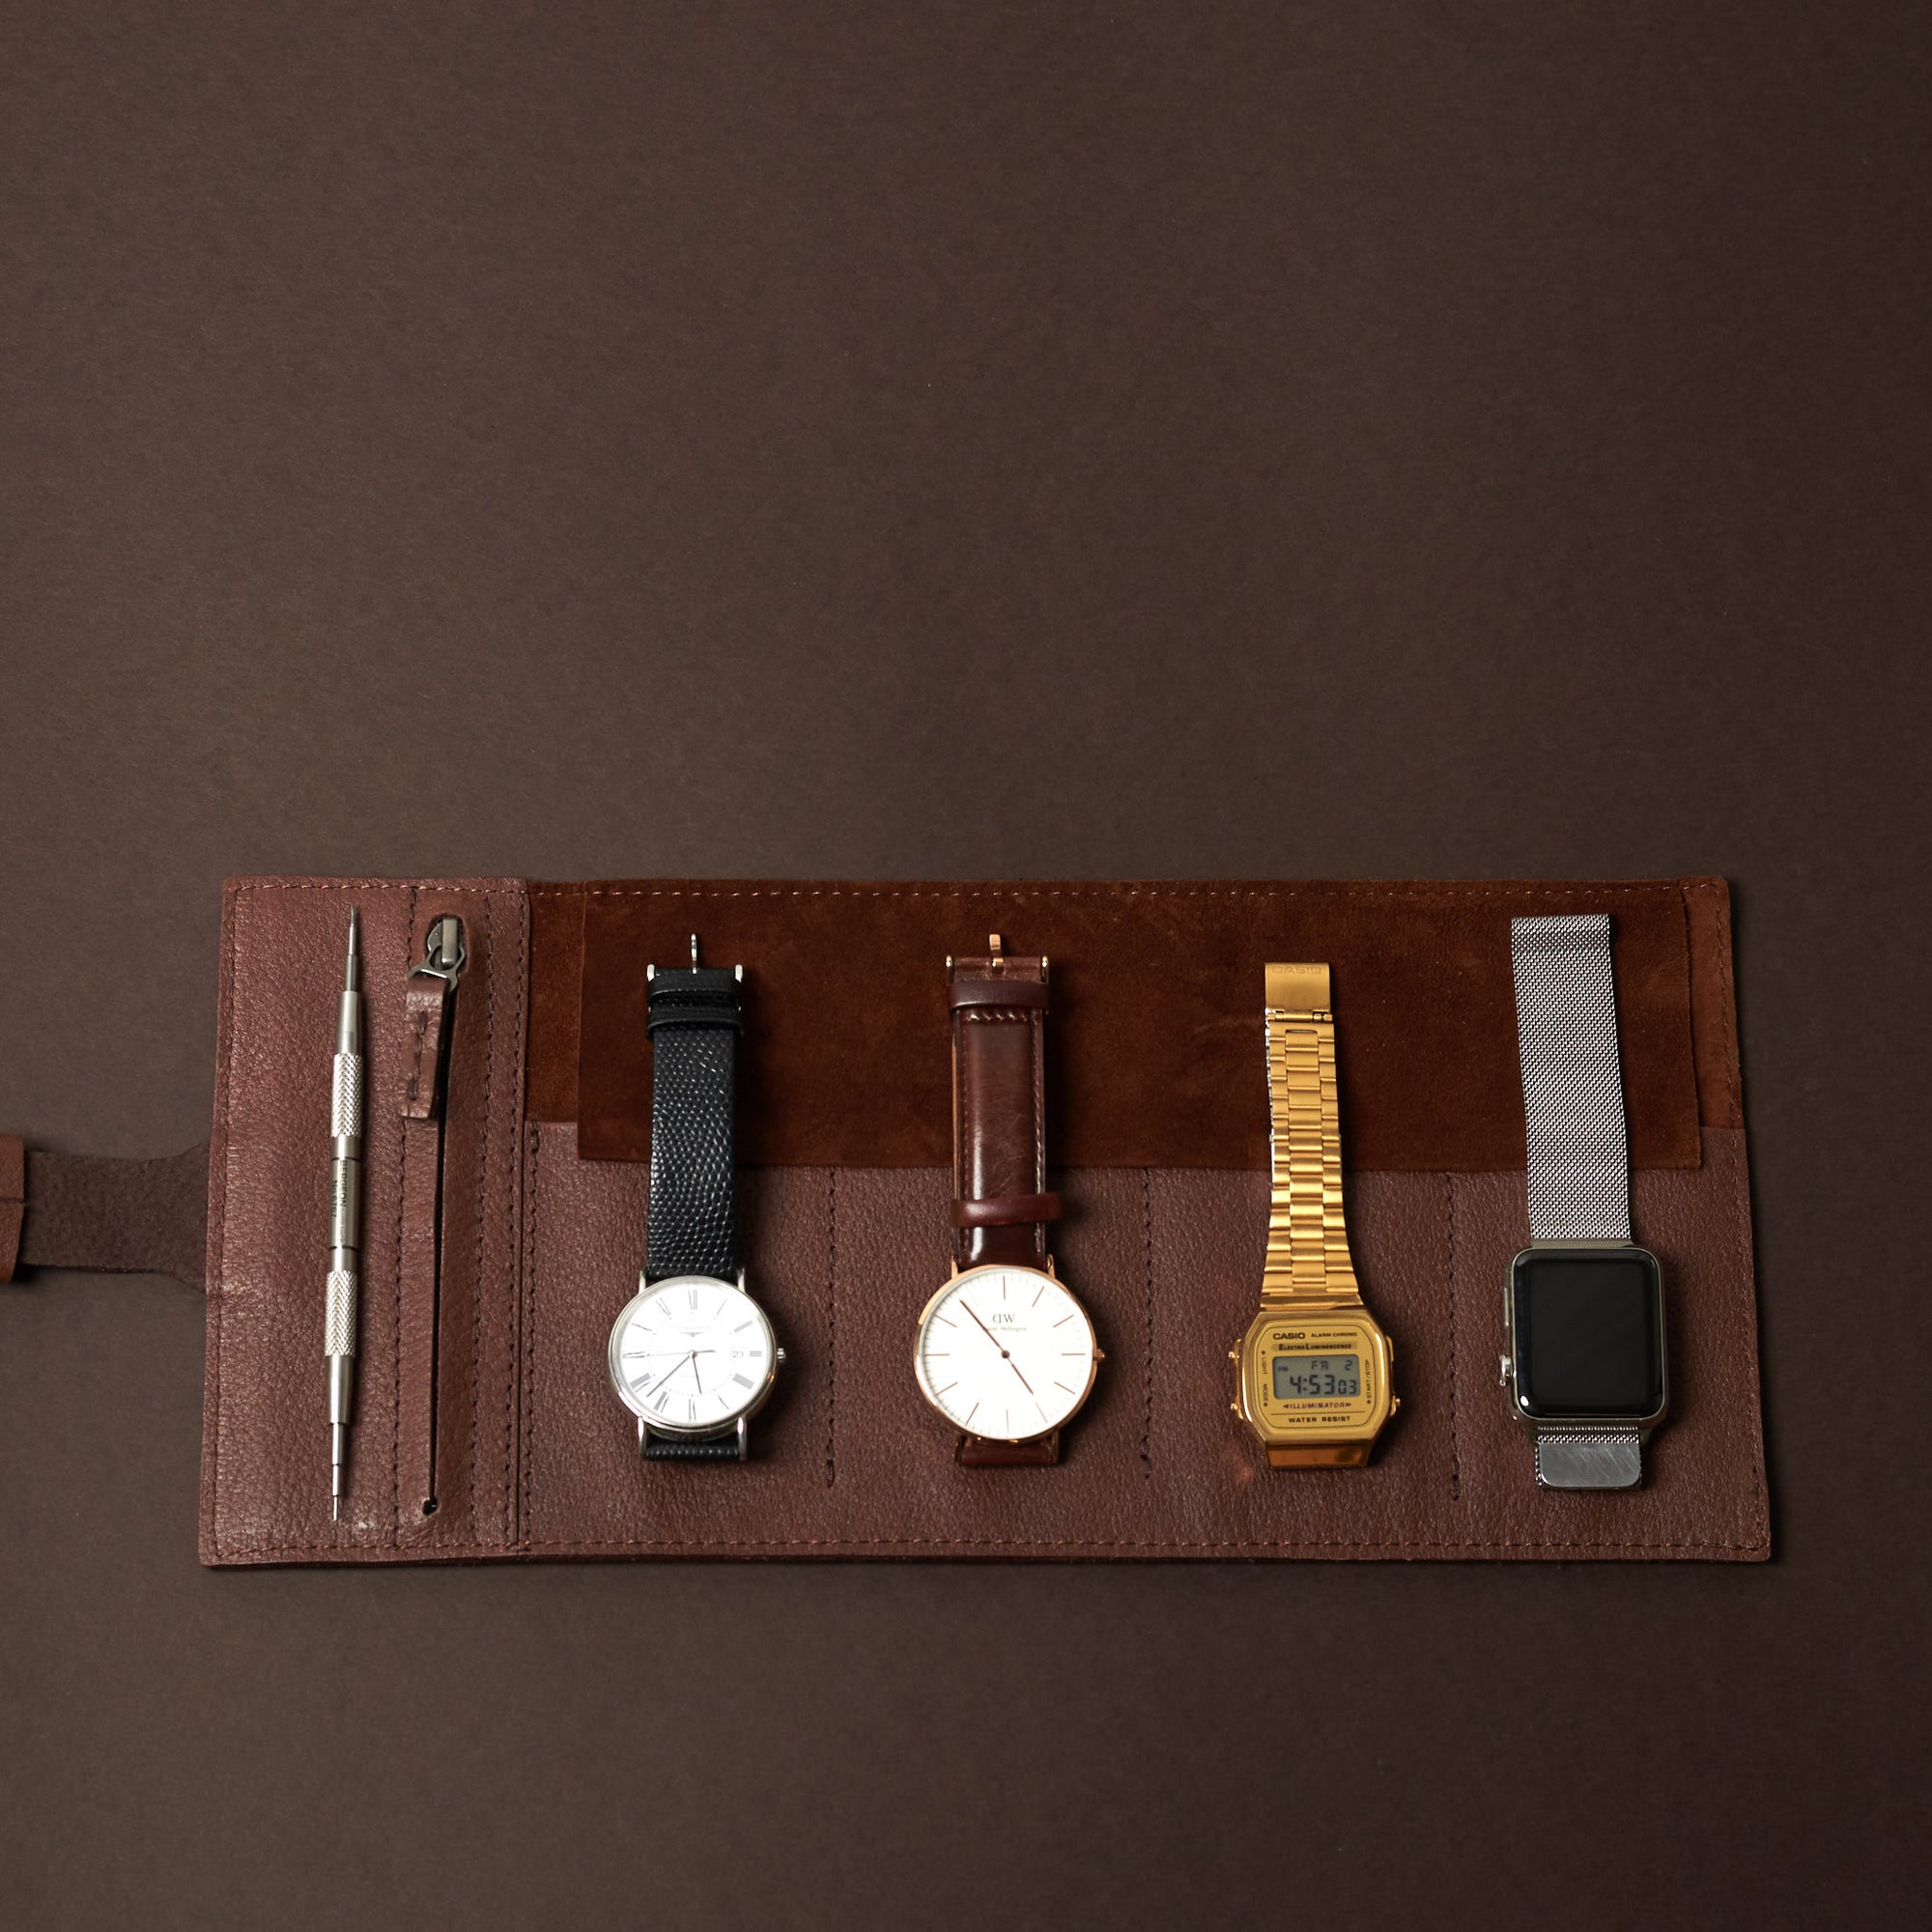 Apple watch case. Leather watch rolls brown by Capra Leather